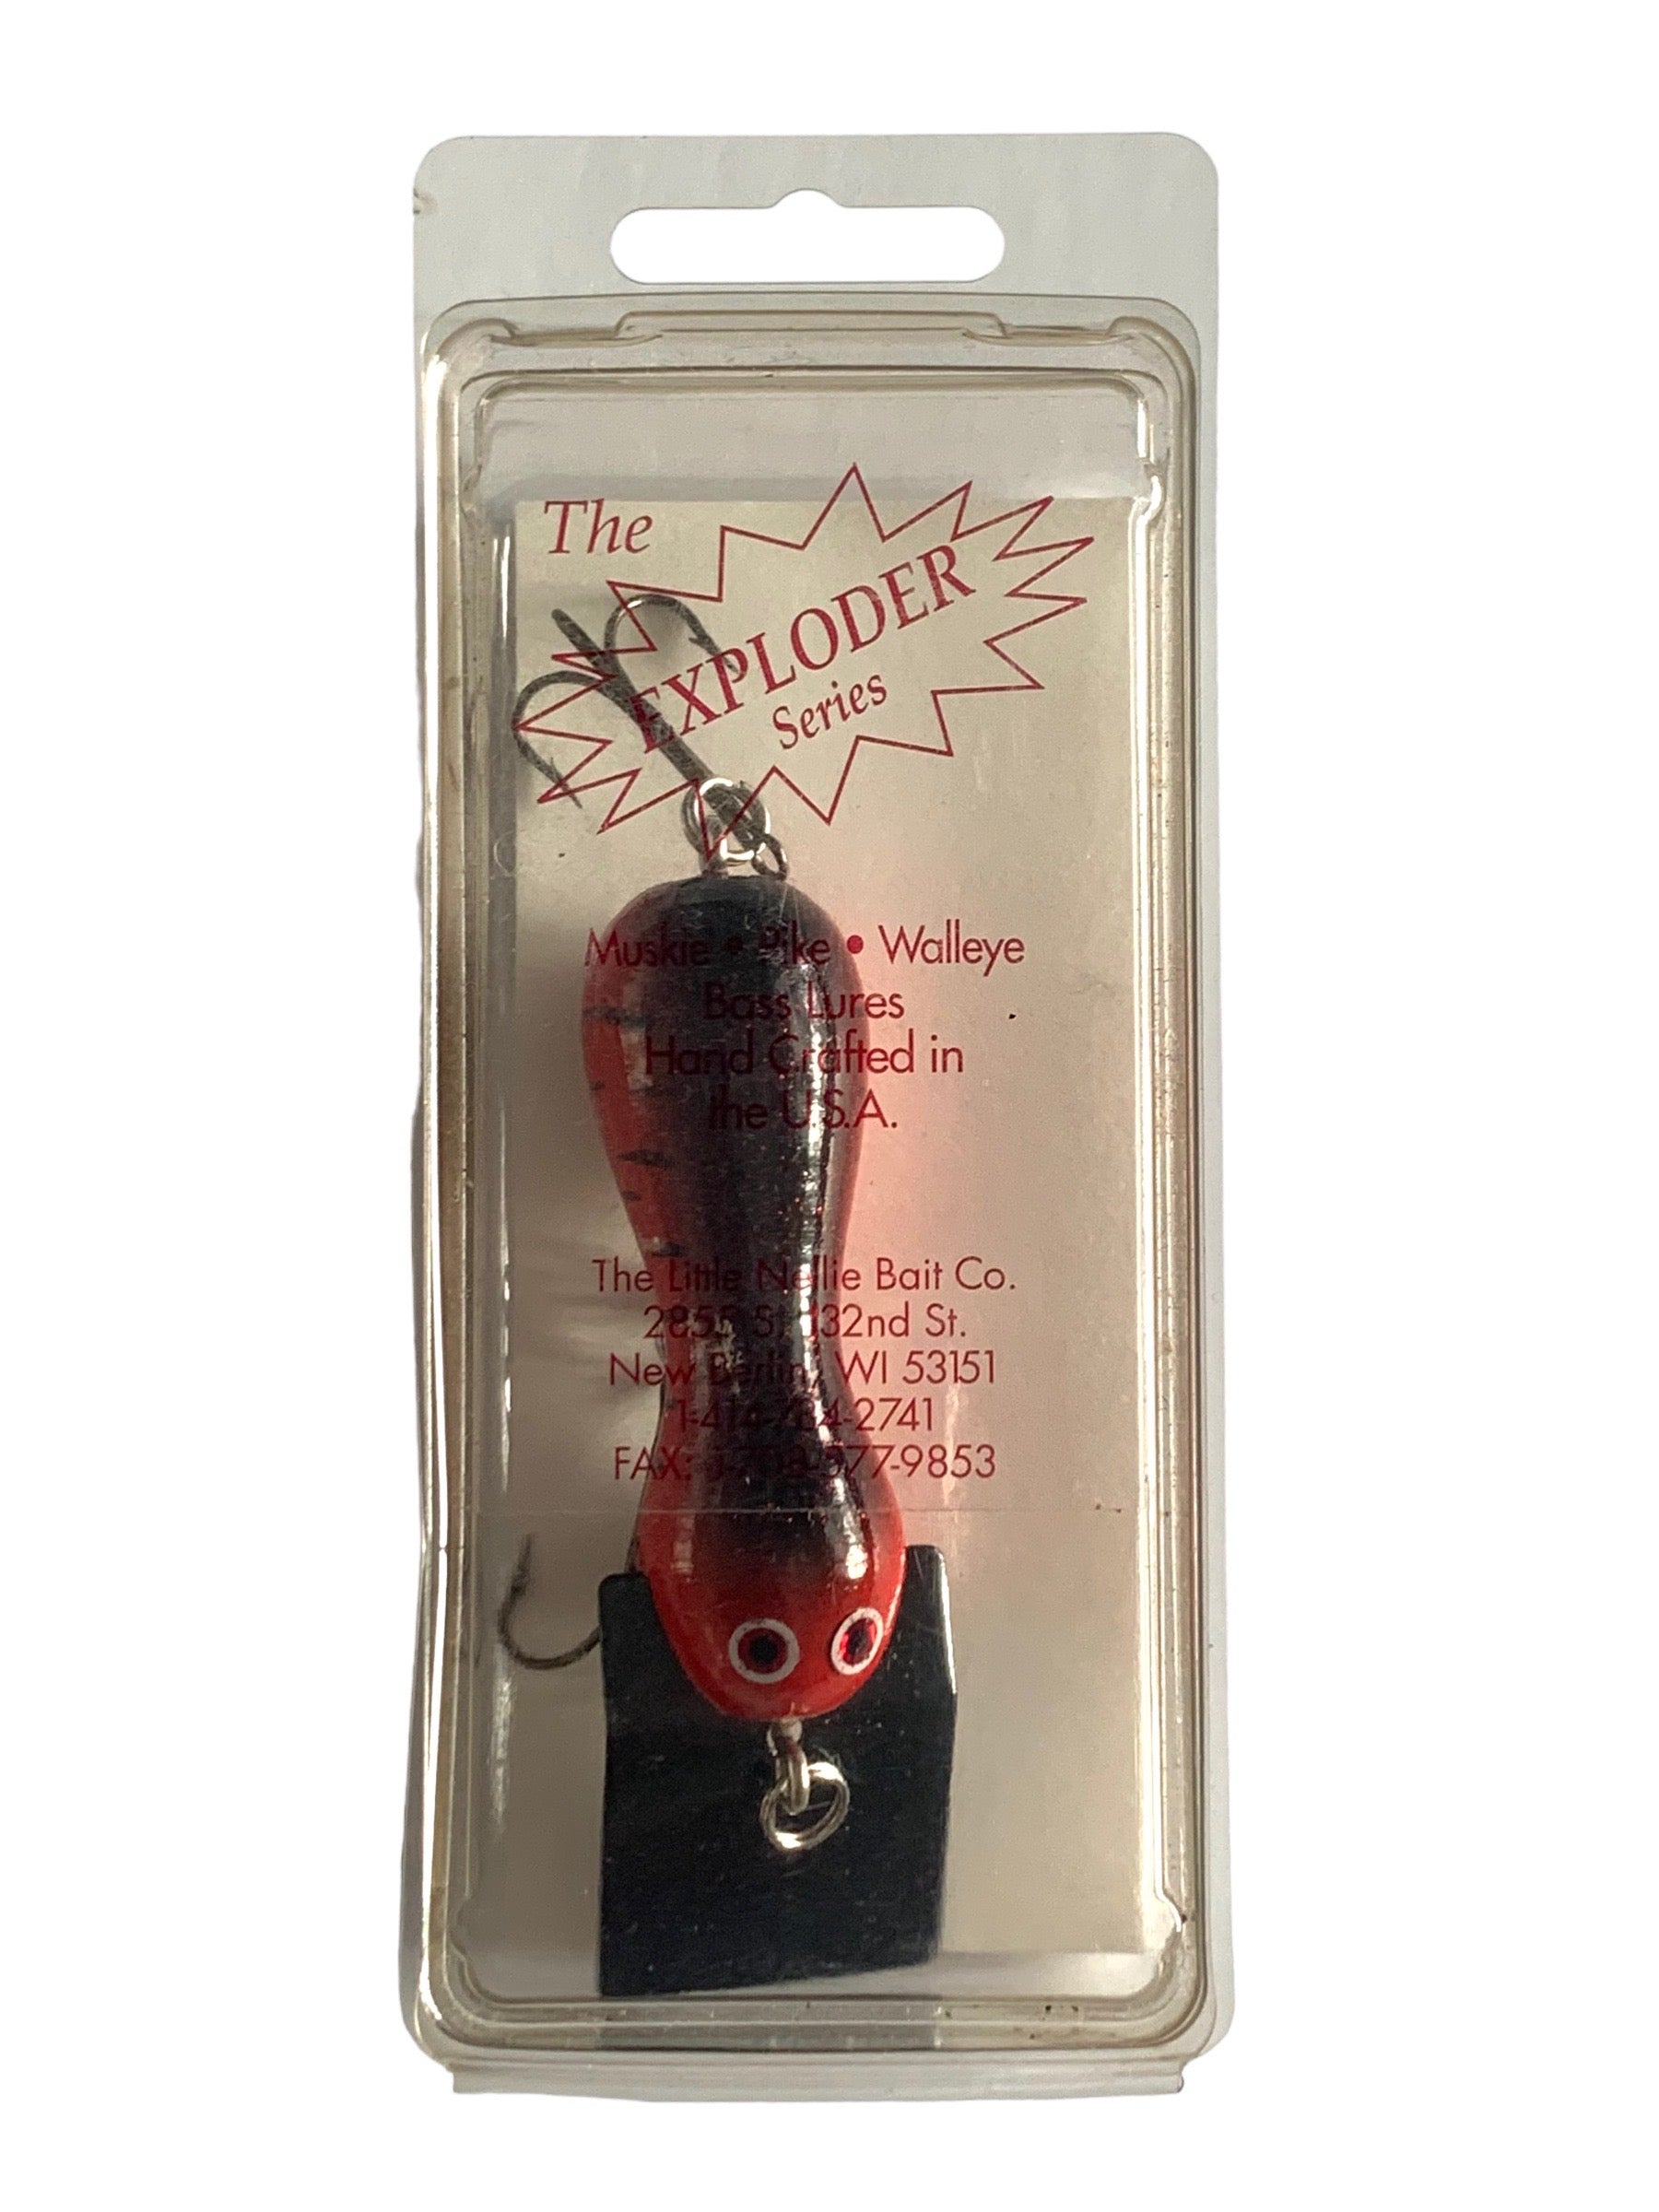 WISCONSIN • Little Nellie Bait Company SPINNER Fishing Lure – Toad